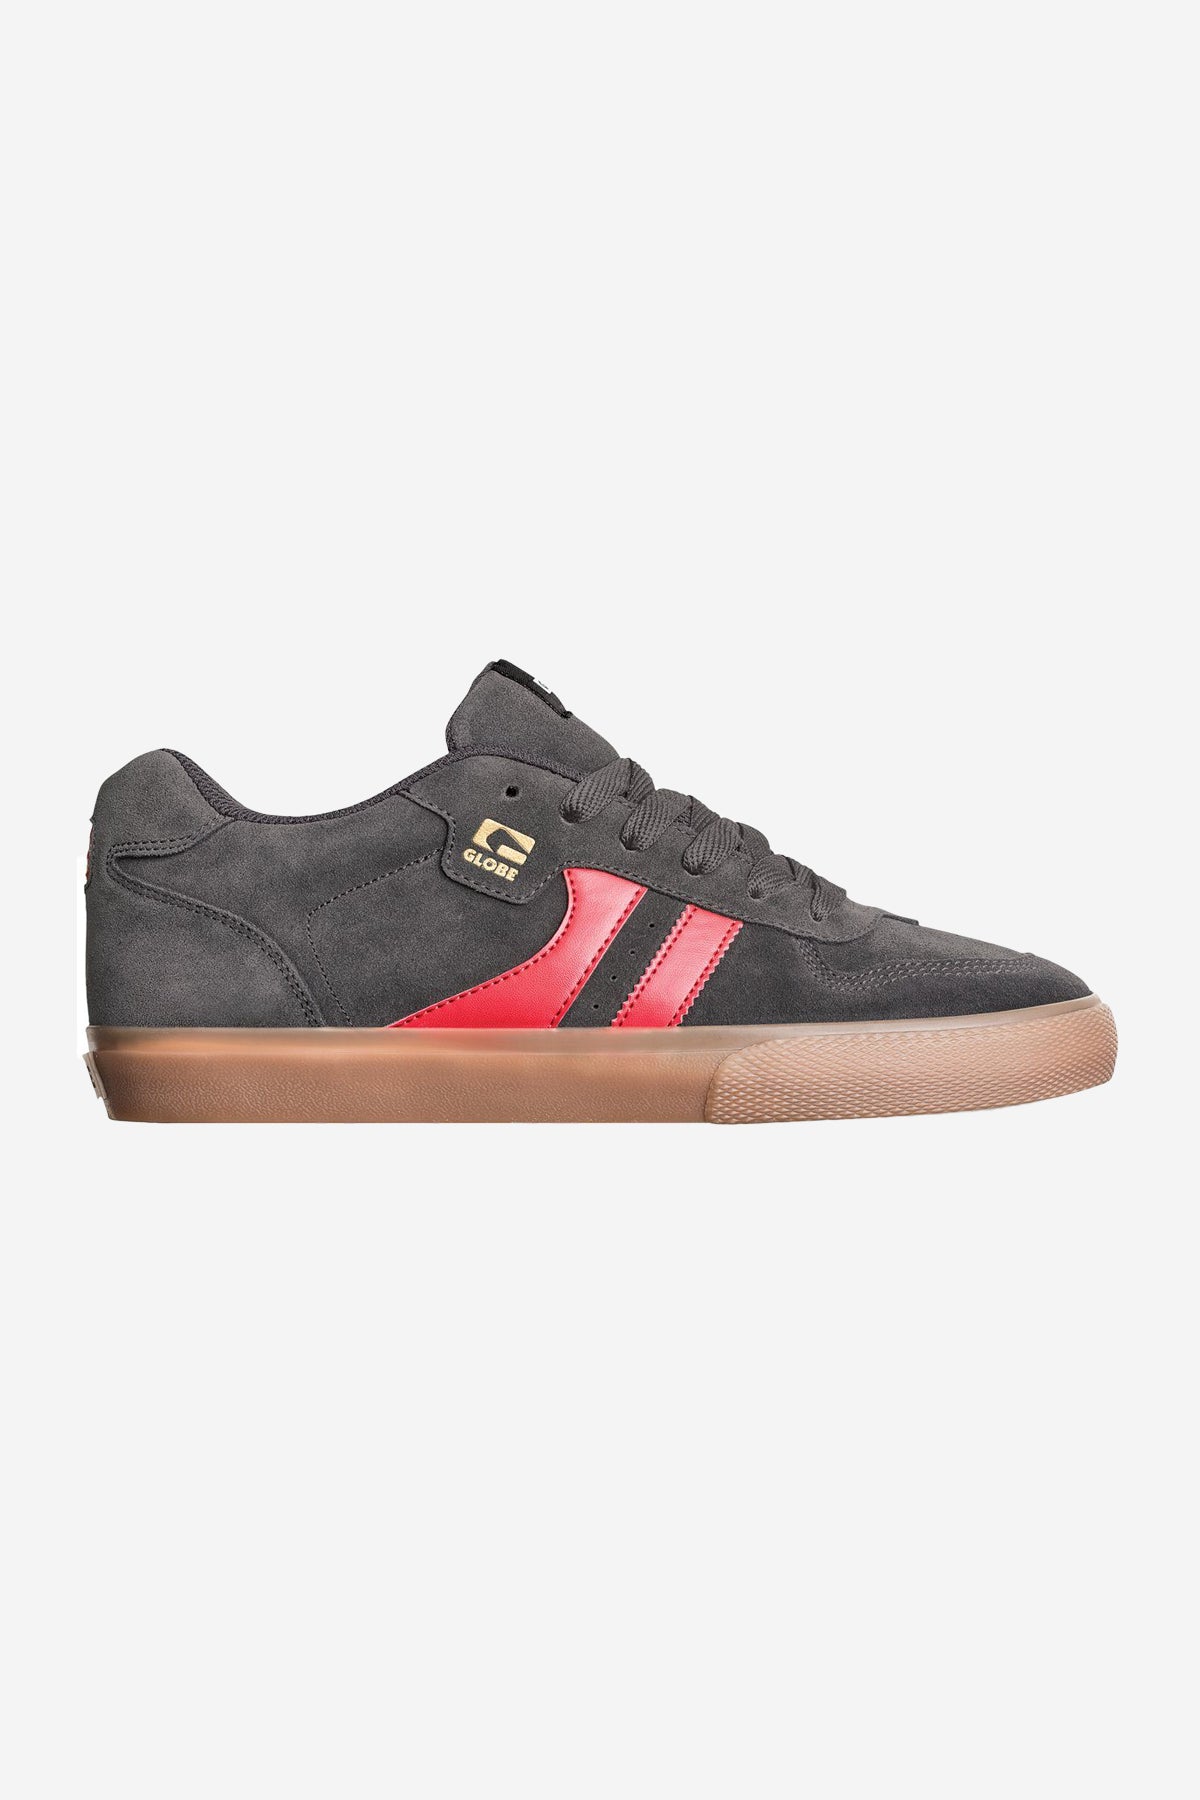 encore-2 charcoal gum red skate shoes